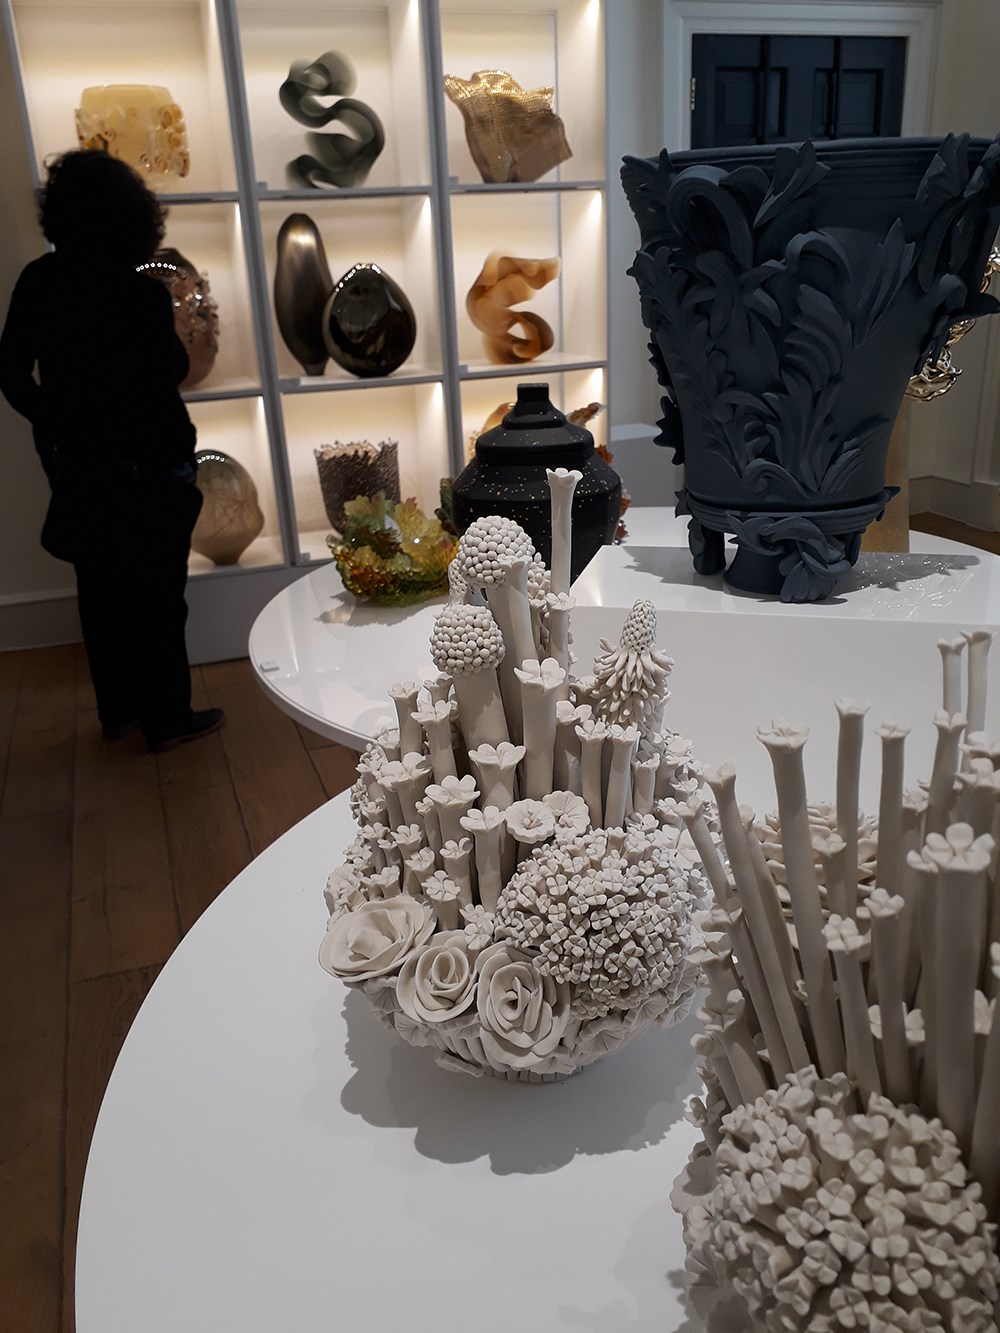 vessel gallery room at collect 2020 somerset house